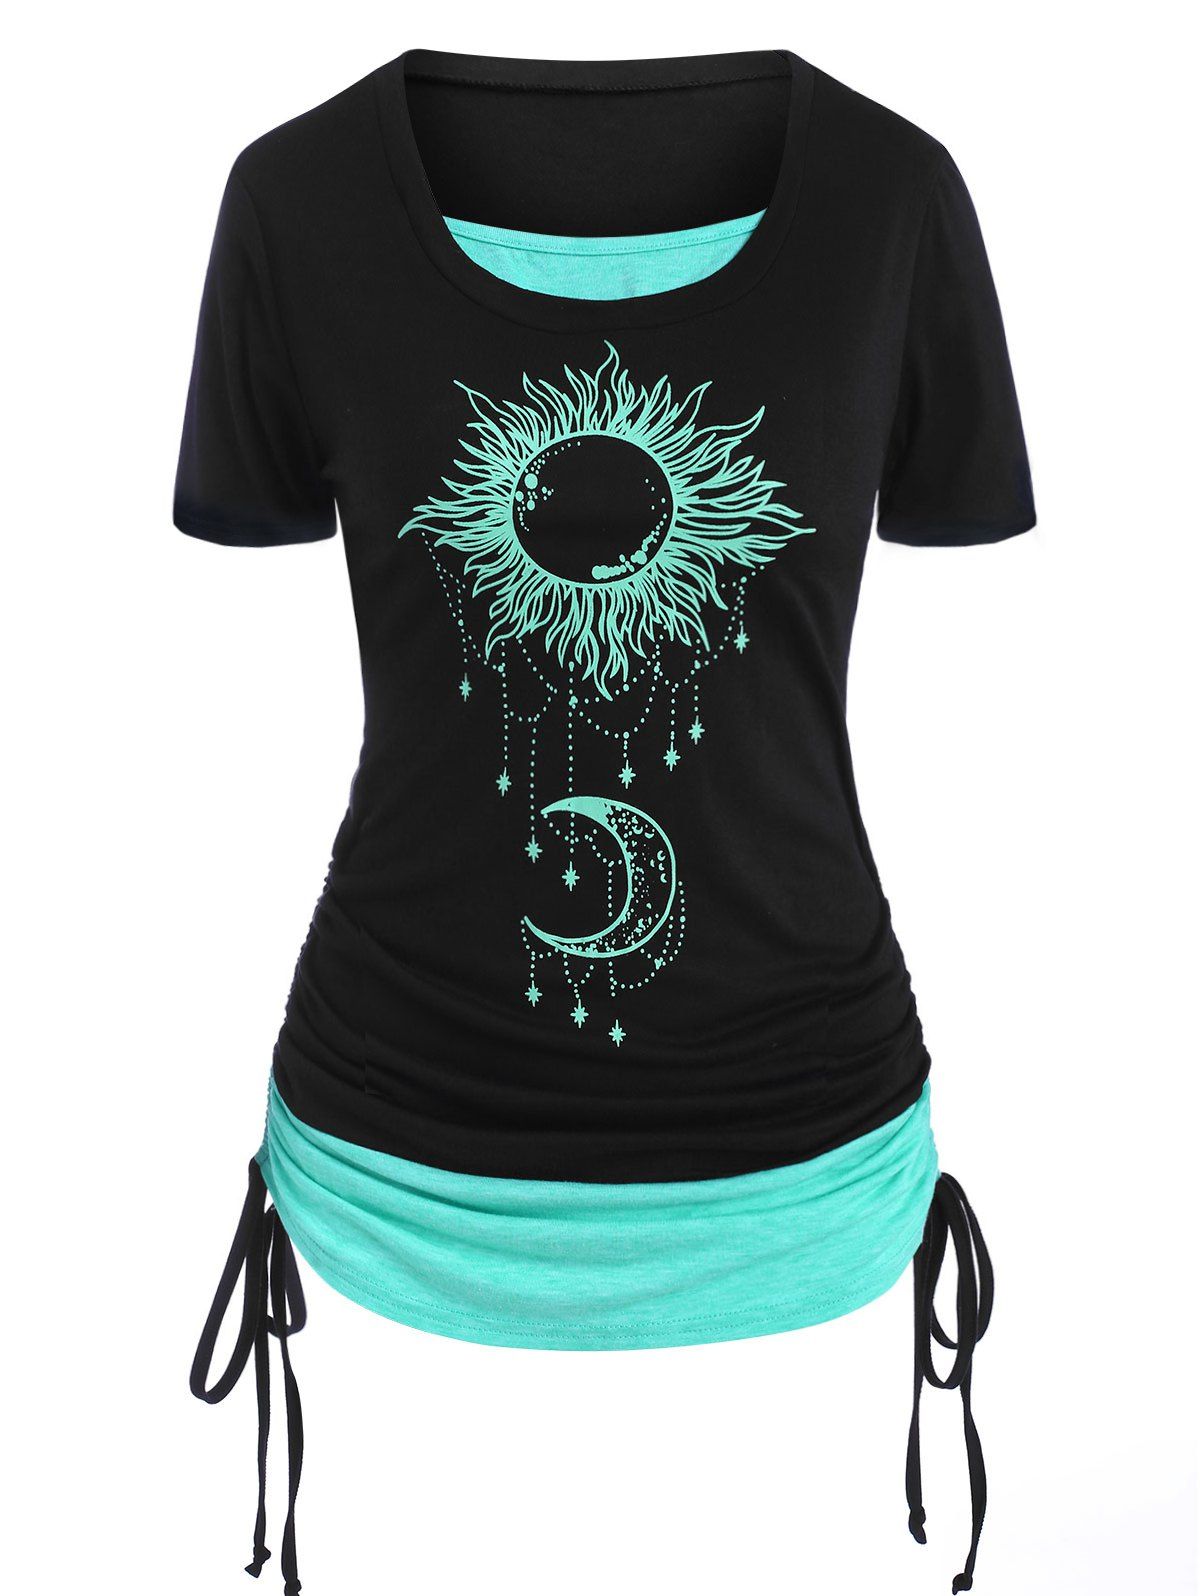 Plus Size Celestial Sun Moon Butterfly Print Cinched 2 In 1 Tee - BLACK 5X